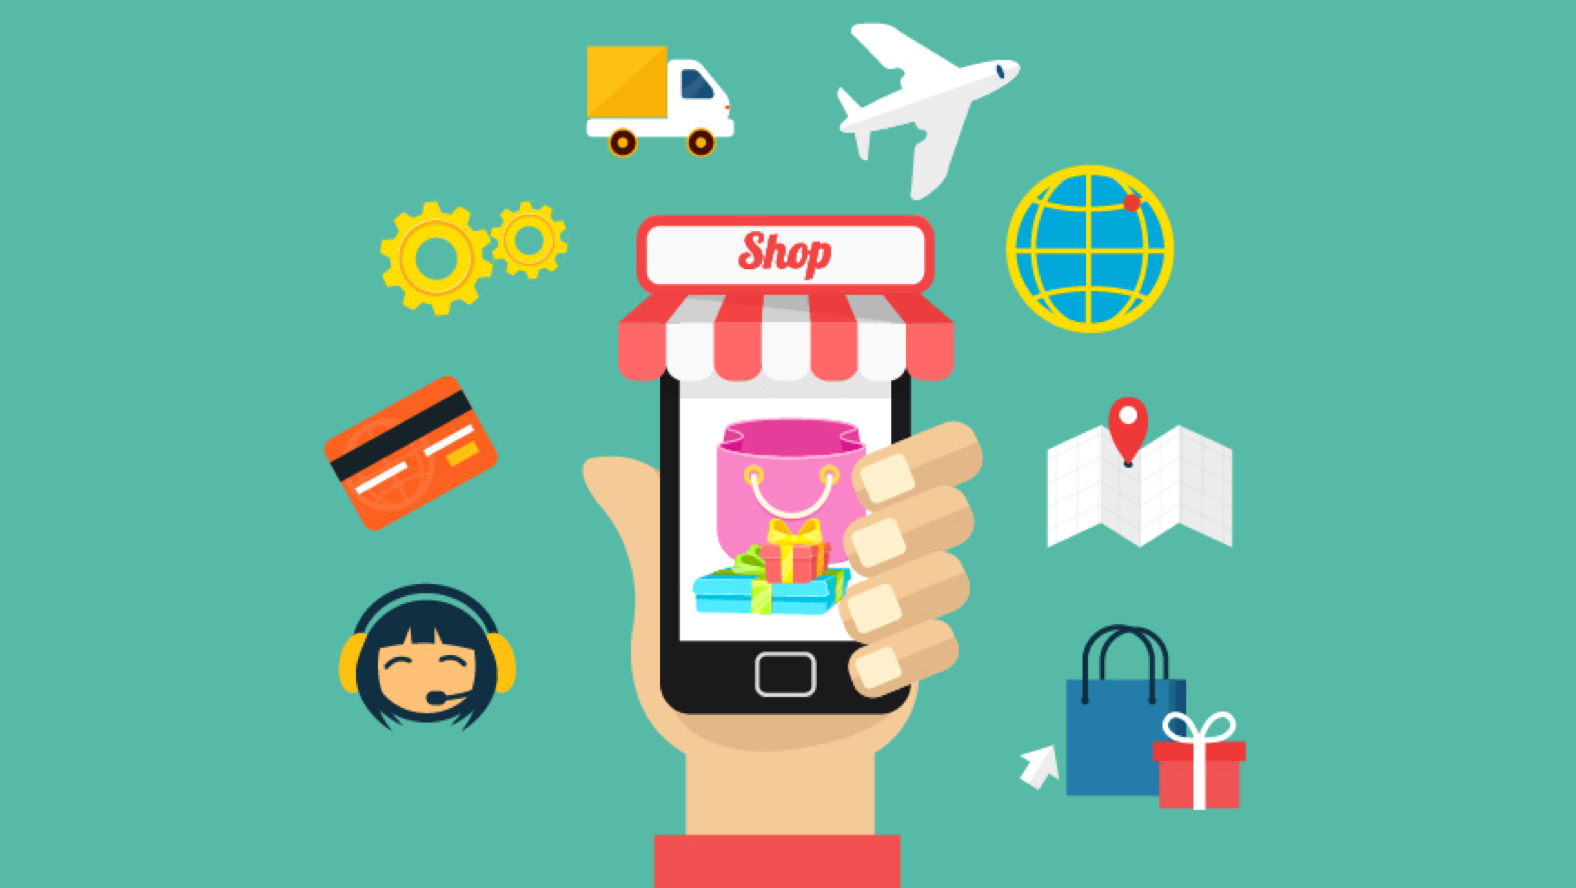 Integrating retail & logistics for successful omni-channel retailing